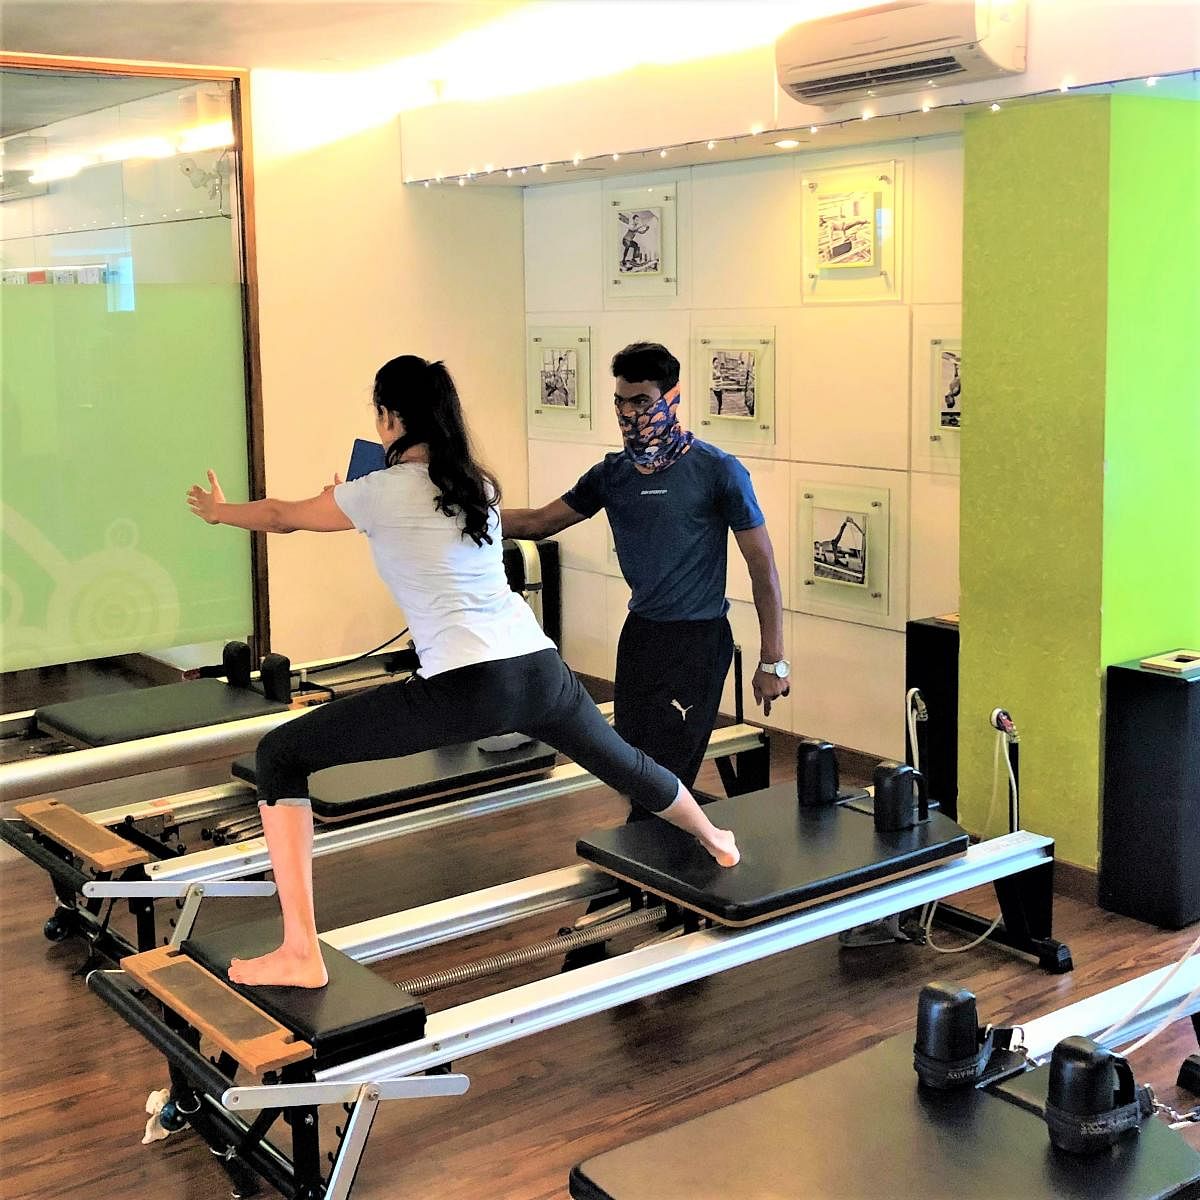 A training session on Pilates Reformer focuses on strength, balance and mobility